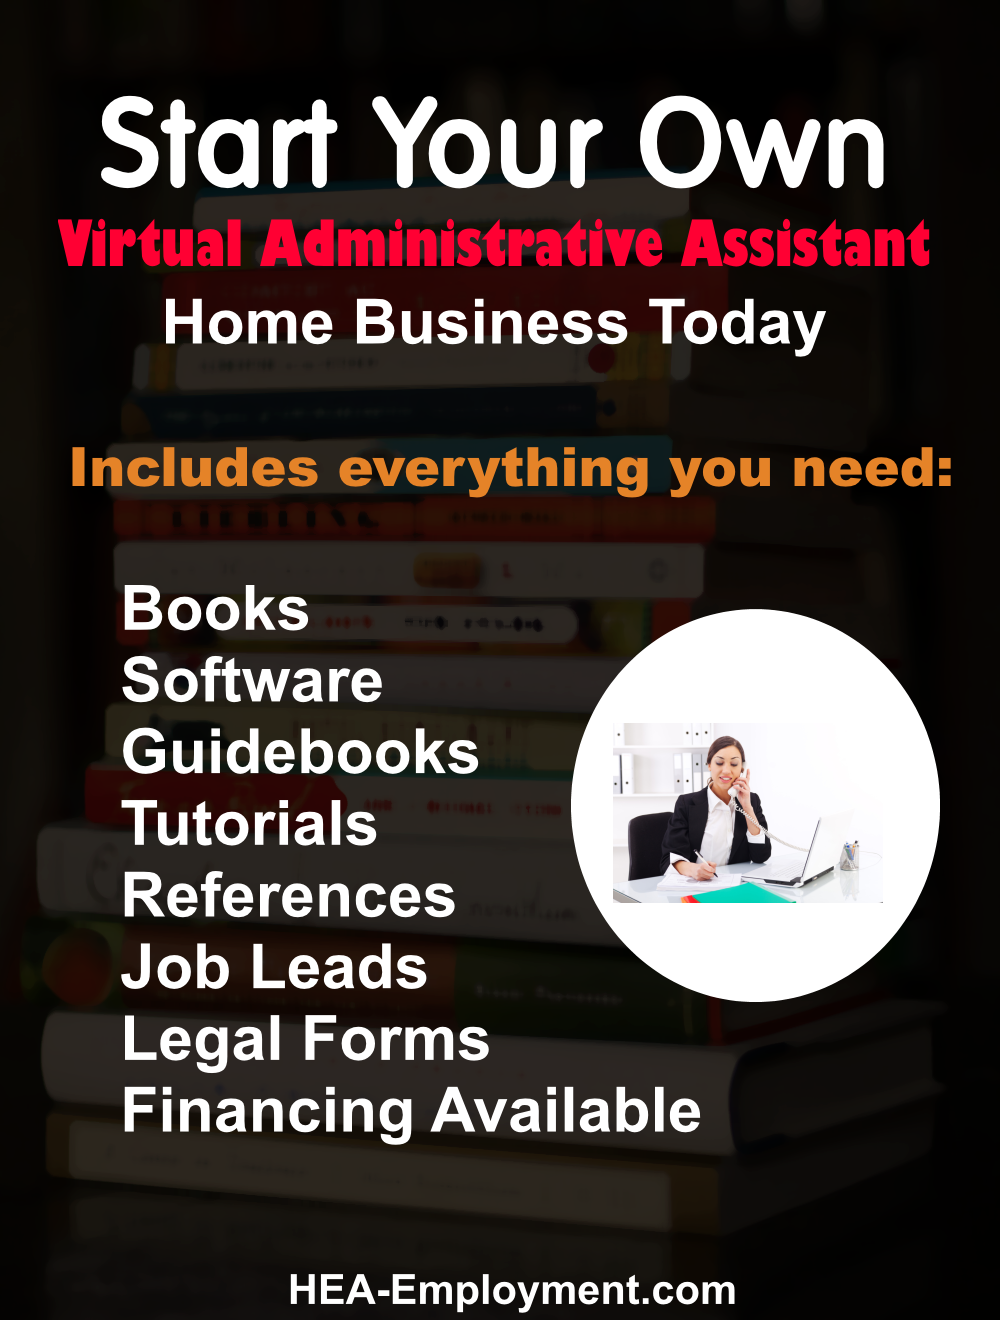 Start your own administrative and virtual assistant legitimate home based business. Fully equipped home business package with everything you need to get started. Productivity software, tutorials, guidebooks, references, manuals, tax advice and legal forms are included with each kit. Be your own boss!